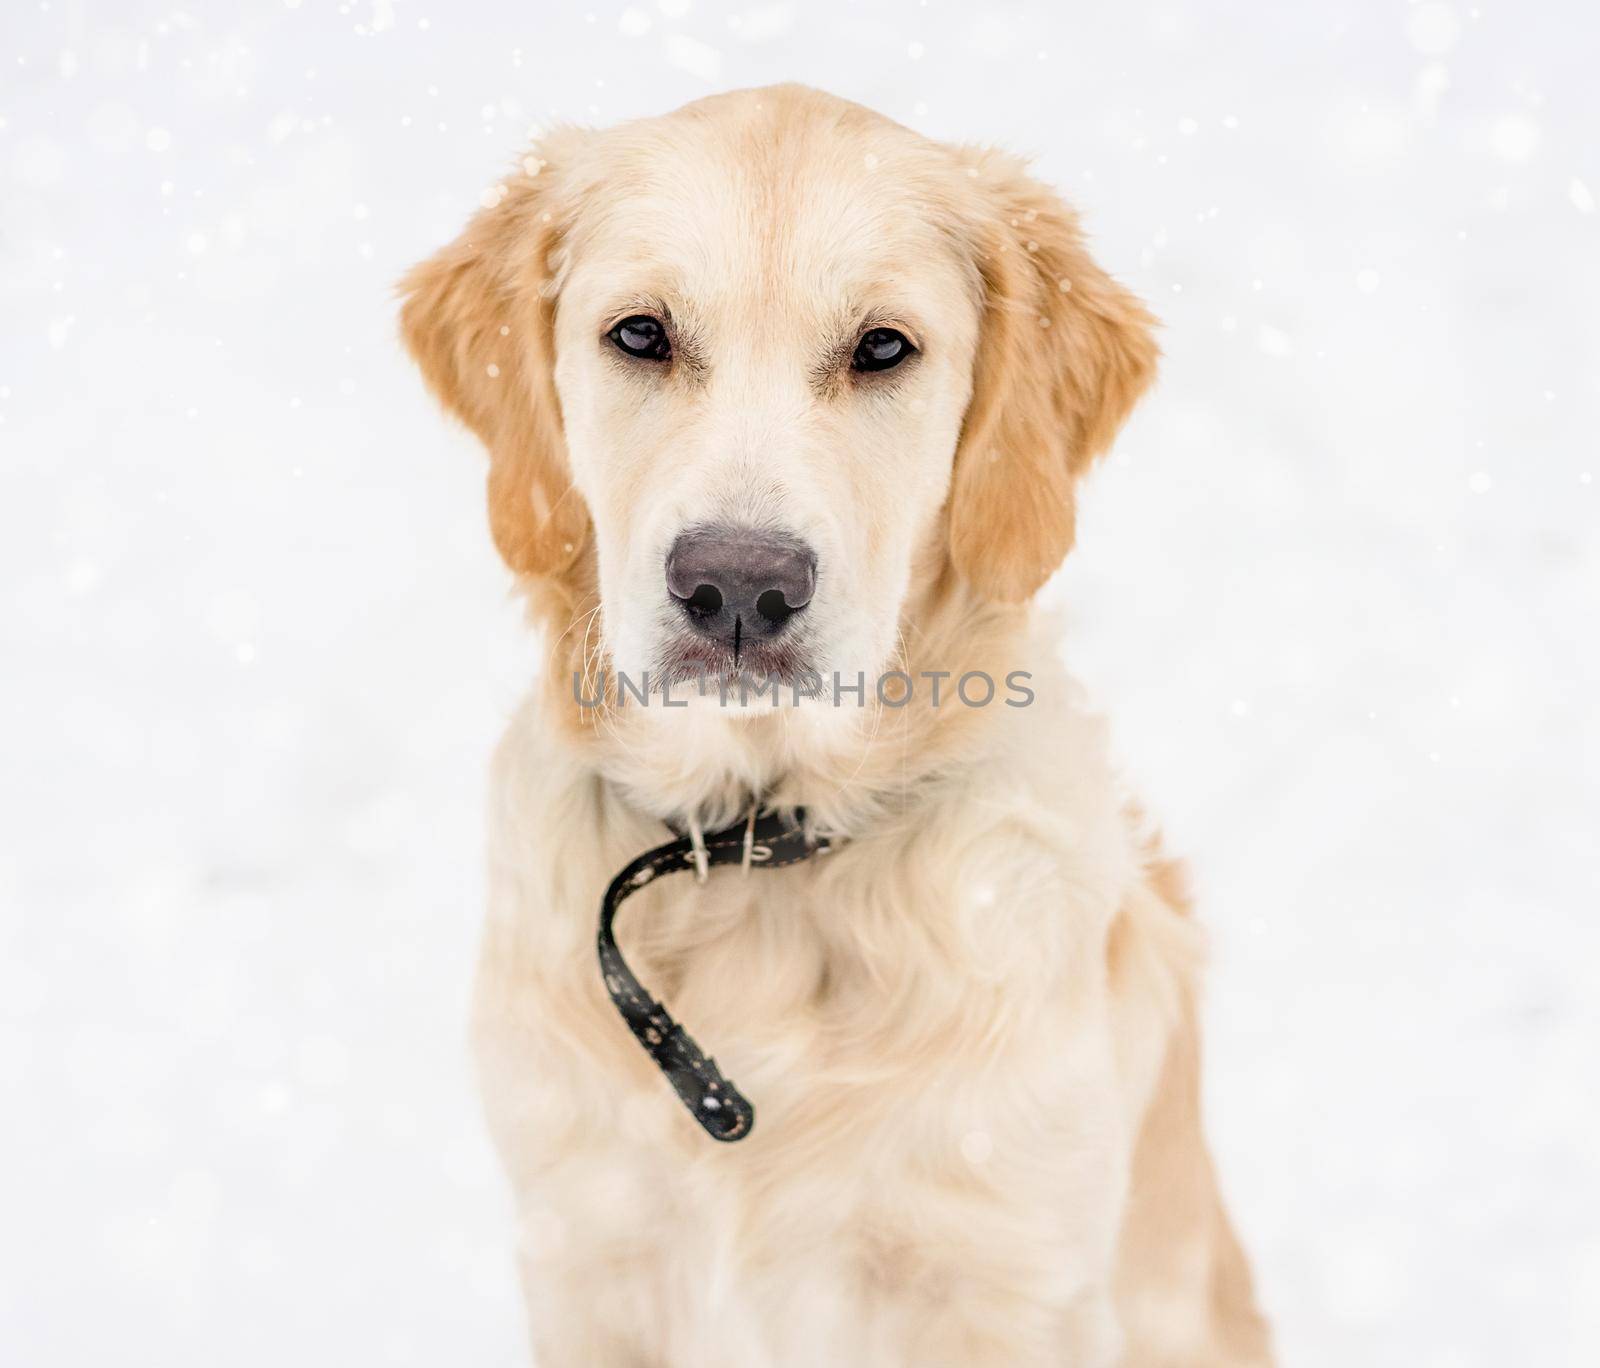 Cute dog muzzle in snowflakes by tan4ikk1